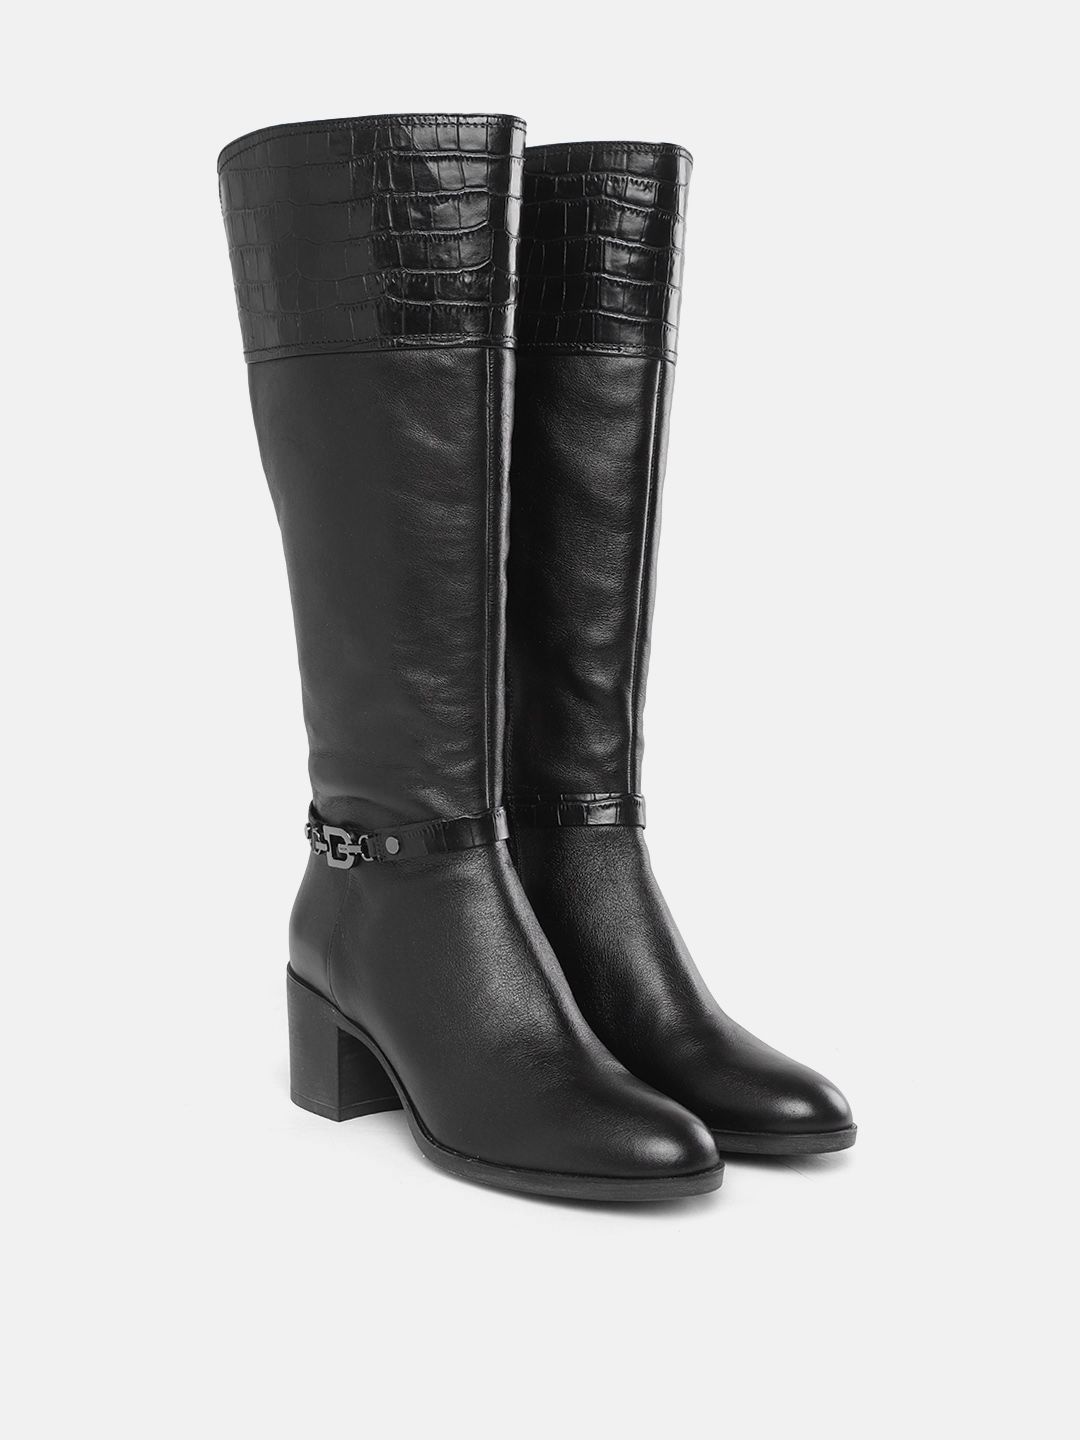 Geox Women Black Leather High-Top Block Heeled Boots Price in India